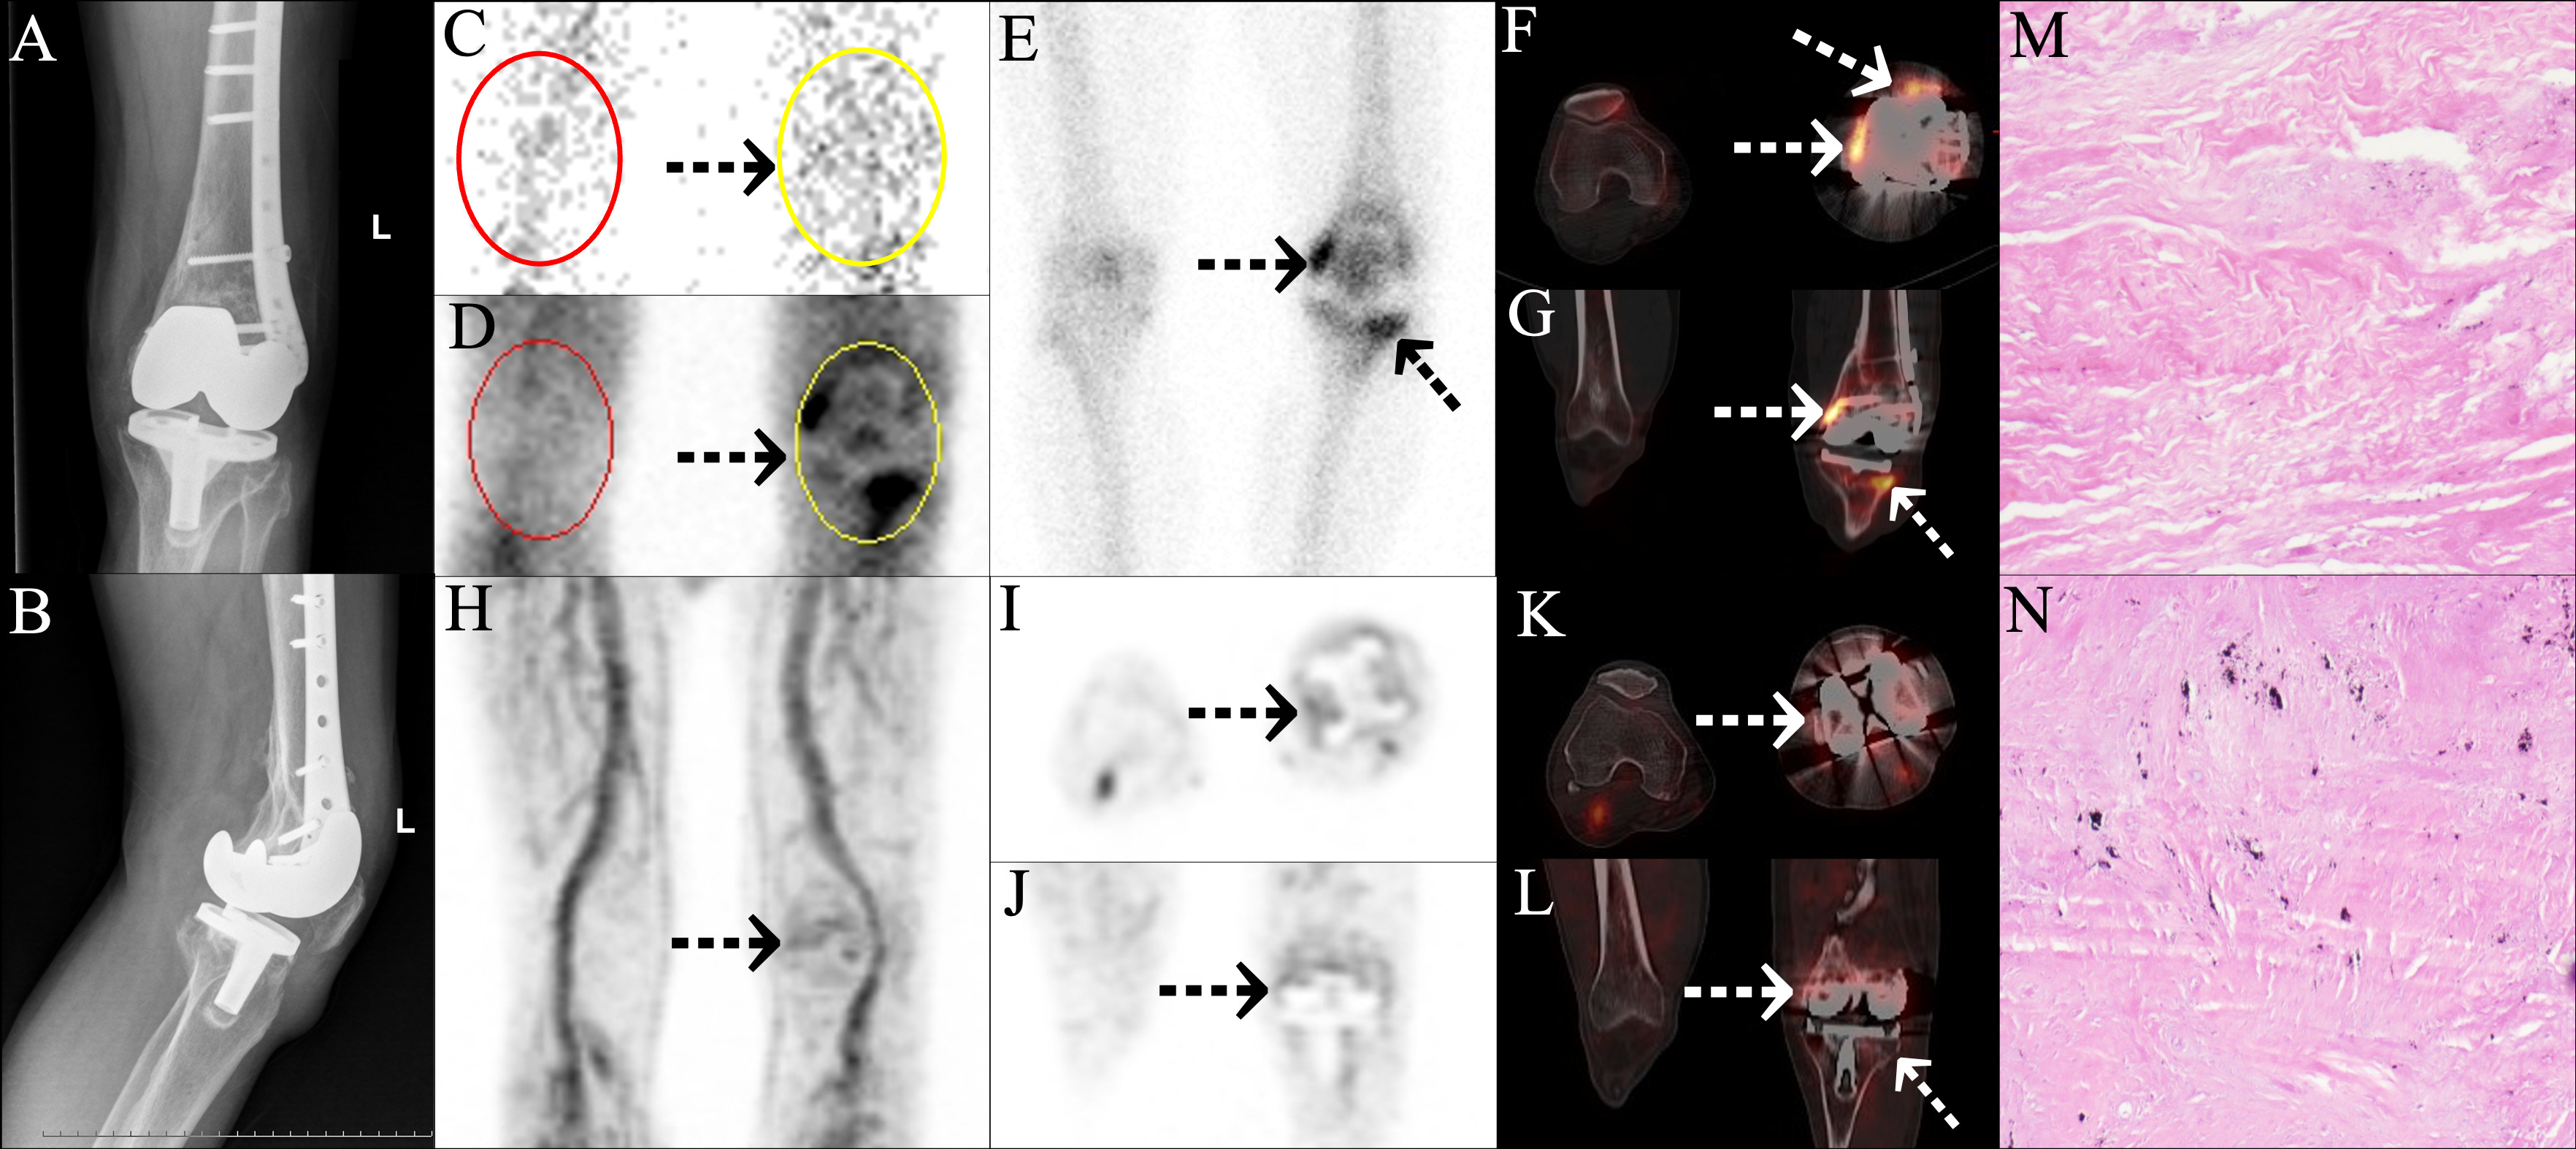 Fig. 5 
          False positive findings in three-phase bone scan and true negative findings in single-photon emission CT (SPECT)/CT and positron emission tomography (PET)/CT in a patient with aseptic loosening (AL). A 66-year-old man underwent left knee arthroplasty for traumatic osteoarthritis of the left knee after fracture of the left femur in 2009, and he developed pain in the left knee joint one week ago. a) and b) No obvious positive signs were found in the anteroposterior (AP) and lateral radiographs postoperative at ten years of the left knee joint. c) to e) 99mTc-MDP three-phase bone scan showed positive perfusion, blood pool, and delayed phase in the left knee (arrows) (red circles of c) to d) – region of interest of the affected side; yellow circles of c) to d) – region of interest of the normal side). f) and g) SPECT/CT revealed several points of focally increased bone metabolism at the bone-prosthesis interface of the left knee (arrows). h) to l) 68Ga-citrate PET/CT showed mild uptake distributed uniformly and symmetrically along the edge of the prosthesis (arrows). The patient then underwent surgical treatment, and a large amount of proliferated synovial tissue was found; the prosthetic joint was obviously loose. m) and n) Histopathological examination showed proliferative fibrous connective tissue (haematoxylin and eosin (H&E) 400×). The postoperative microbial cultures were both negative. The patient was diagnosed with AL.
        